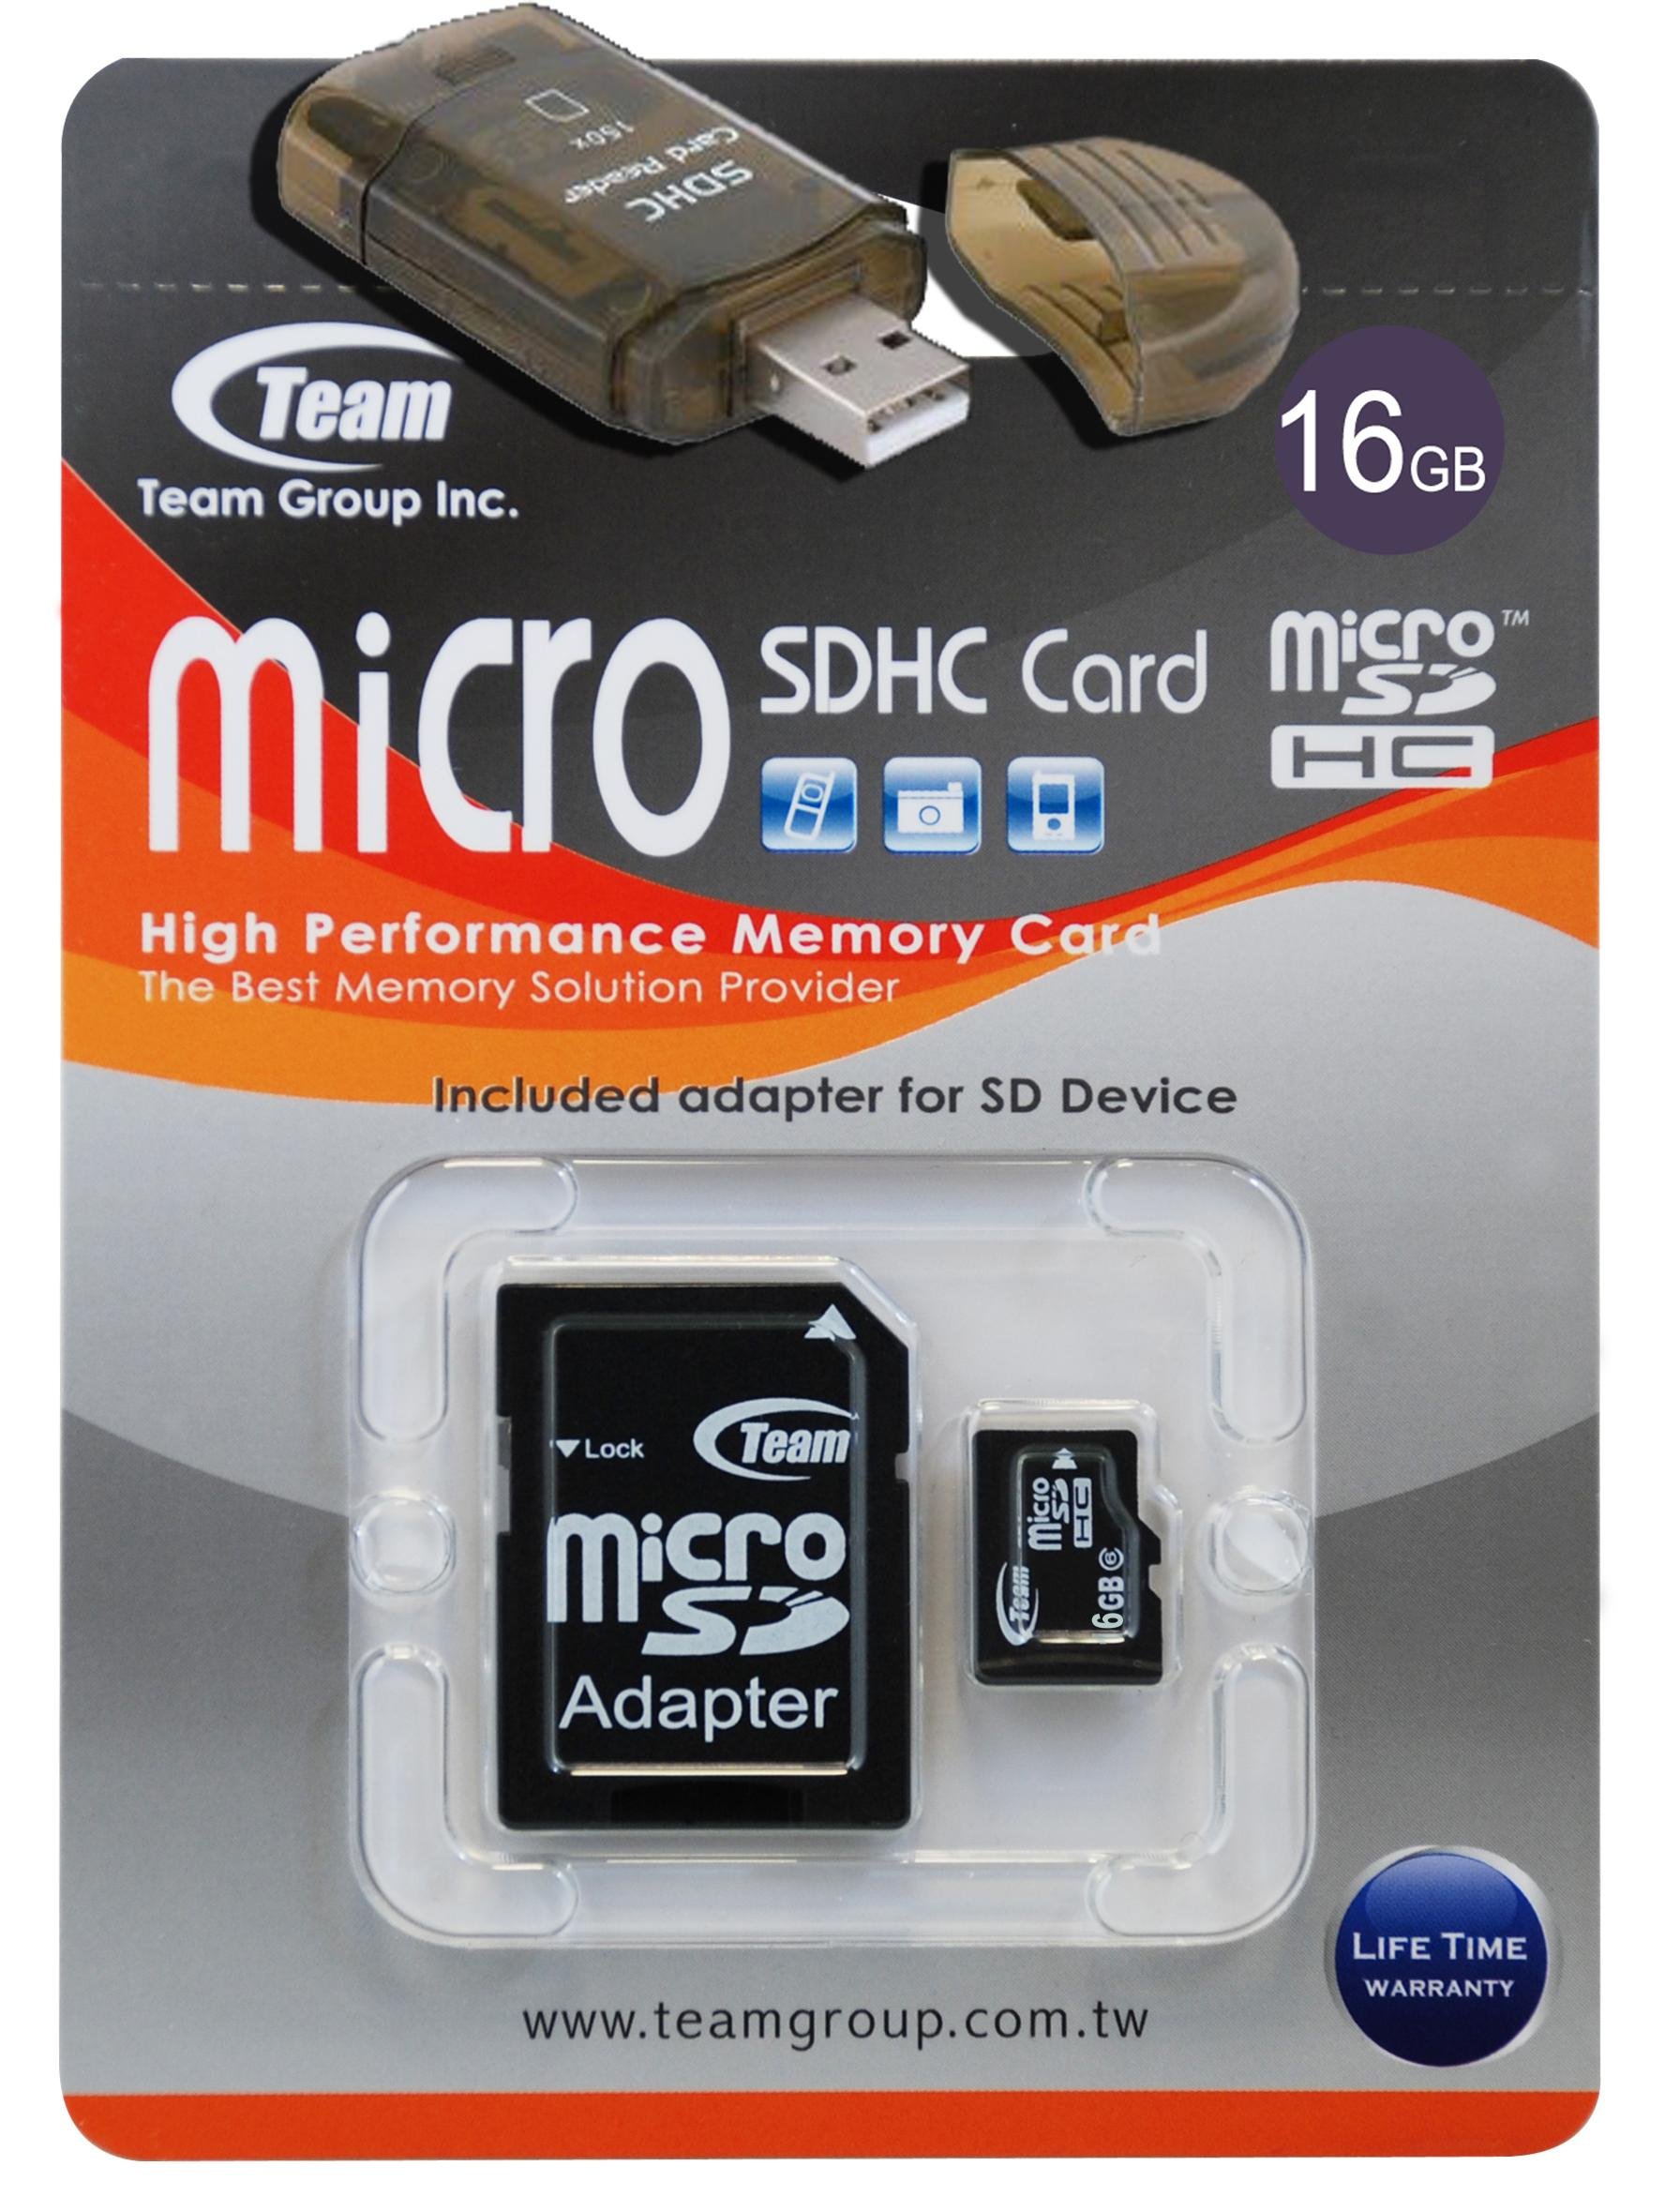 16GB Turbo Speed Class 6 MicroSDHC Memory Card For SAMSUNG M2310 M2510 M3510. High Speed Card Comes with a free SD and USB Ad